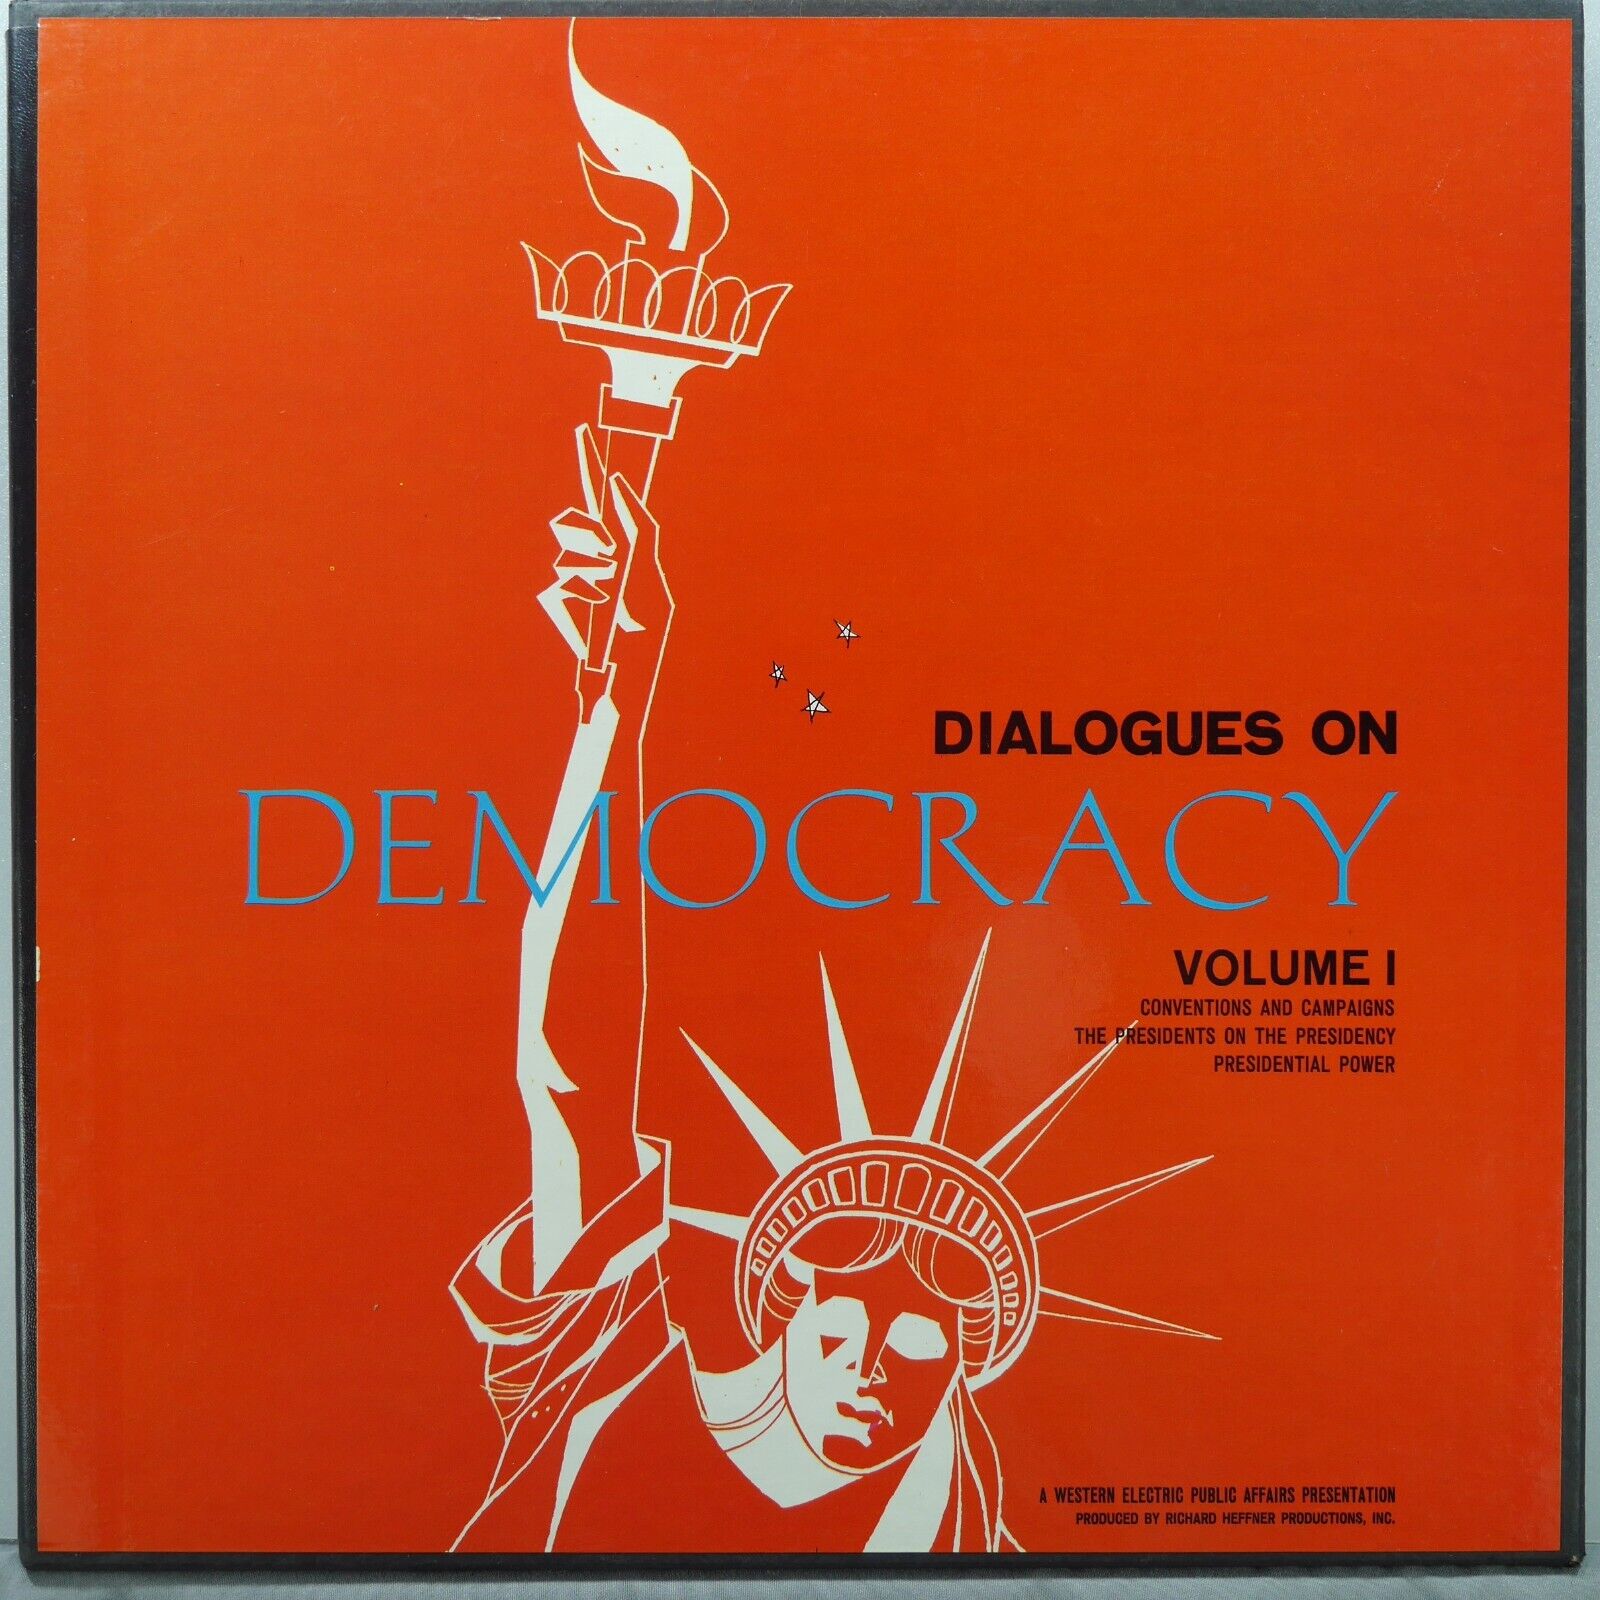 DIALOGUES ON DEMOCRACY Volume 1 & 2 WESTERN ELECTRIC PUBLIC AFFAIRS  1964